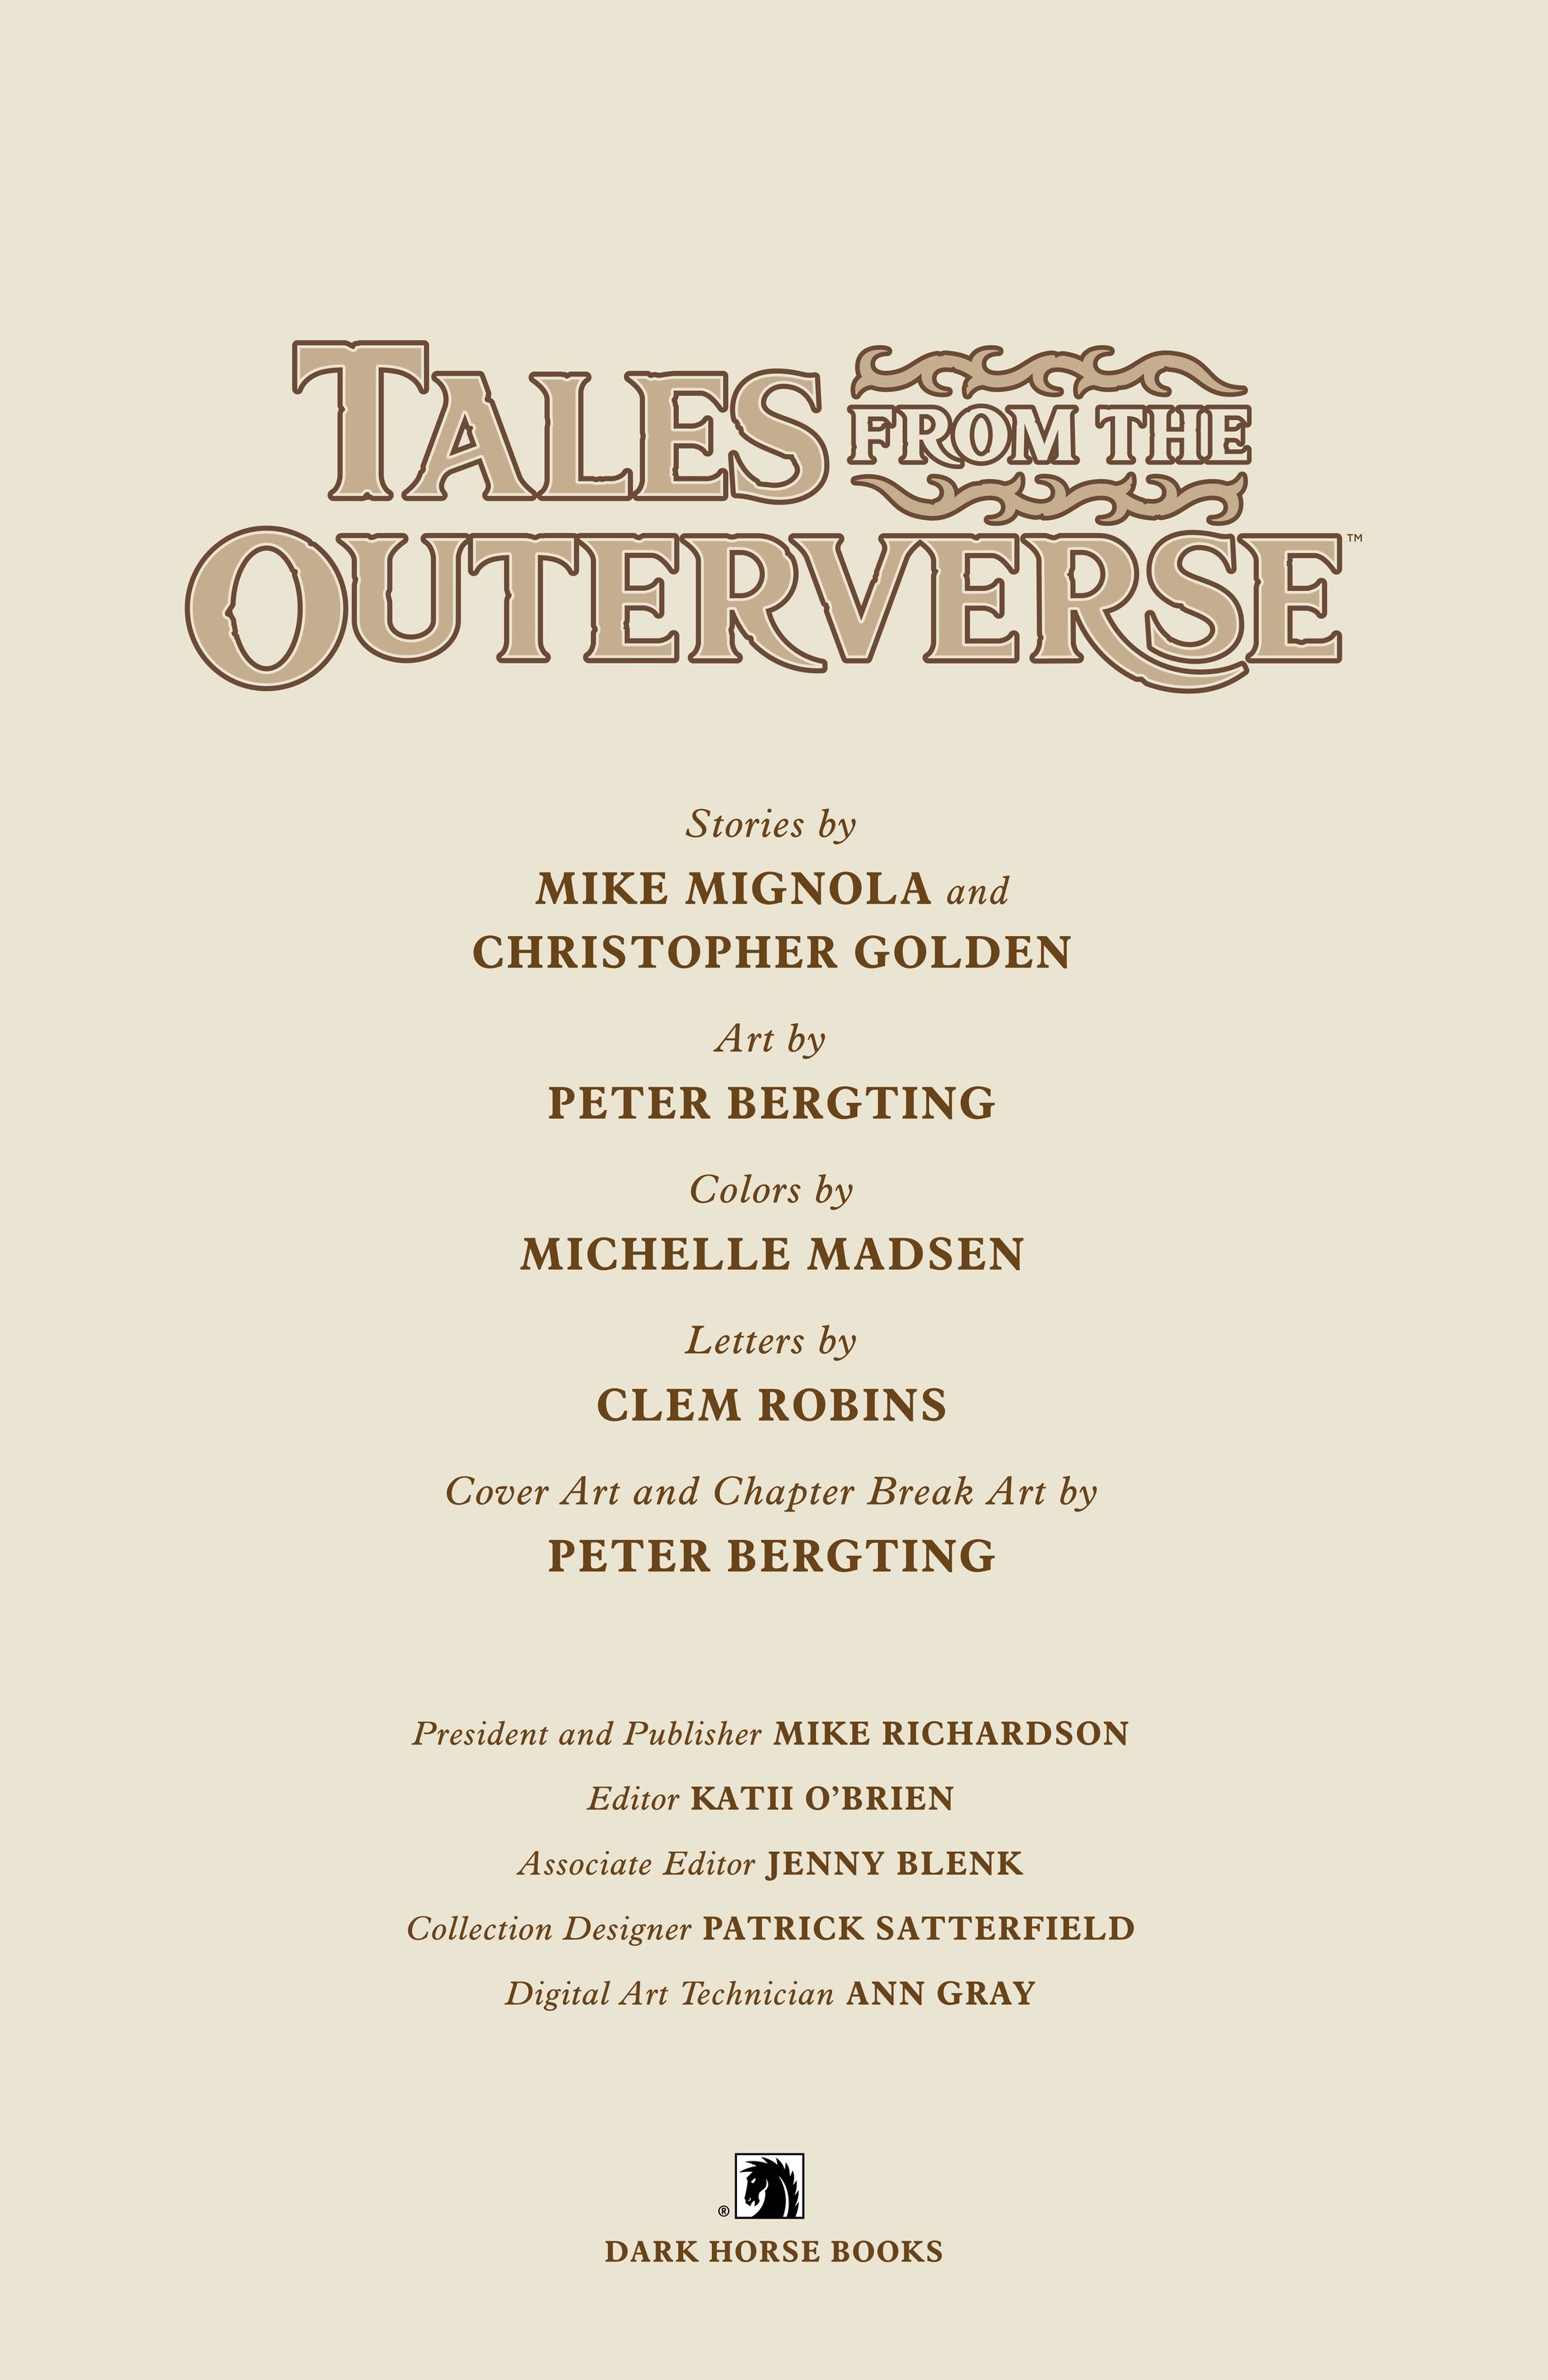 Read online Tales from the Outerverse comic -  Issue # TPB - 6